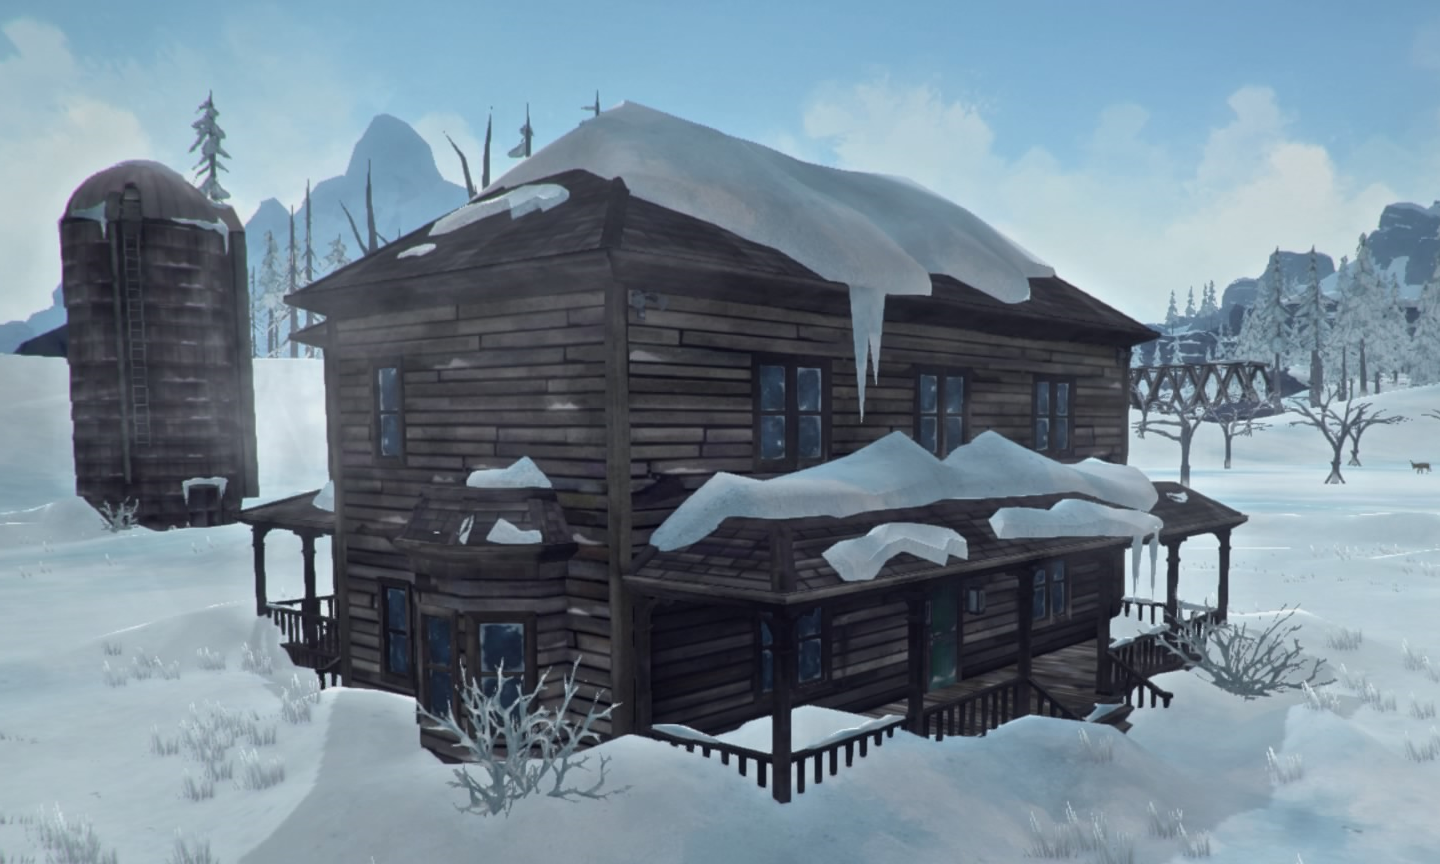 Tales from the far. The long Dark Tales from the far Territory карта. The long Dark Tales from the far Territory новая локация. Trappers Homestead the long Dark. Кемп the long Dark.